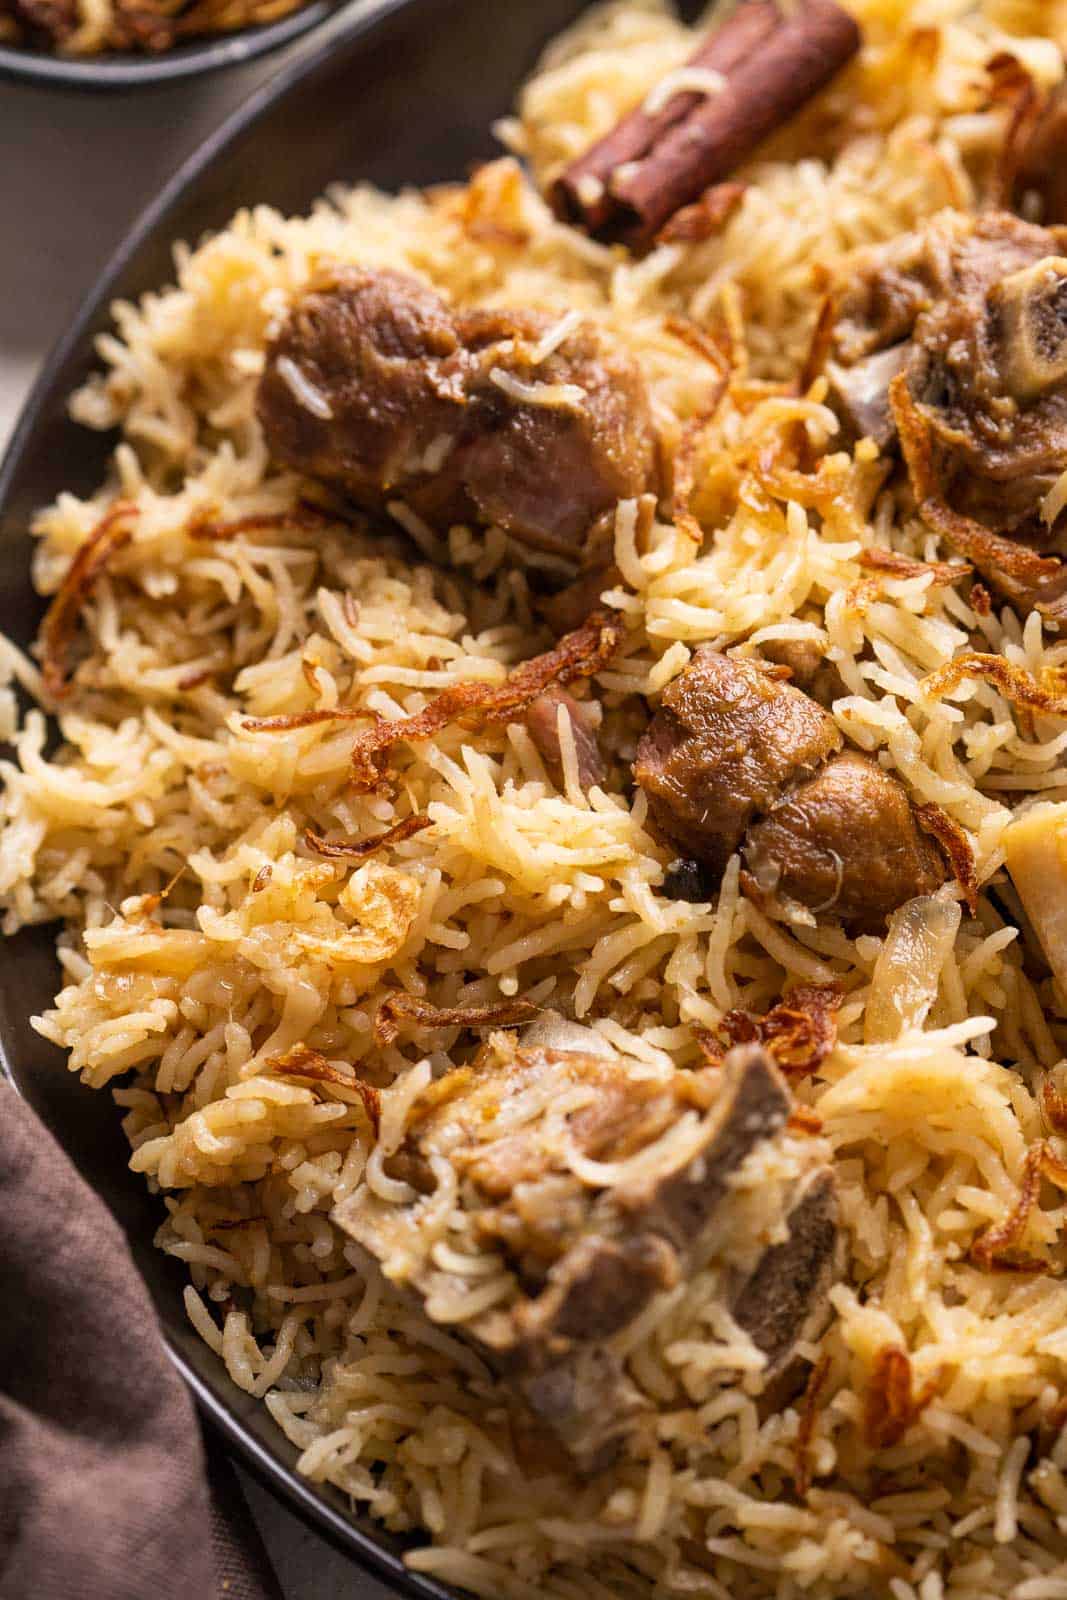 Closeup of yakhni pulao to show the texture of rice and mutton pieces